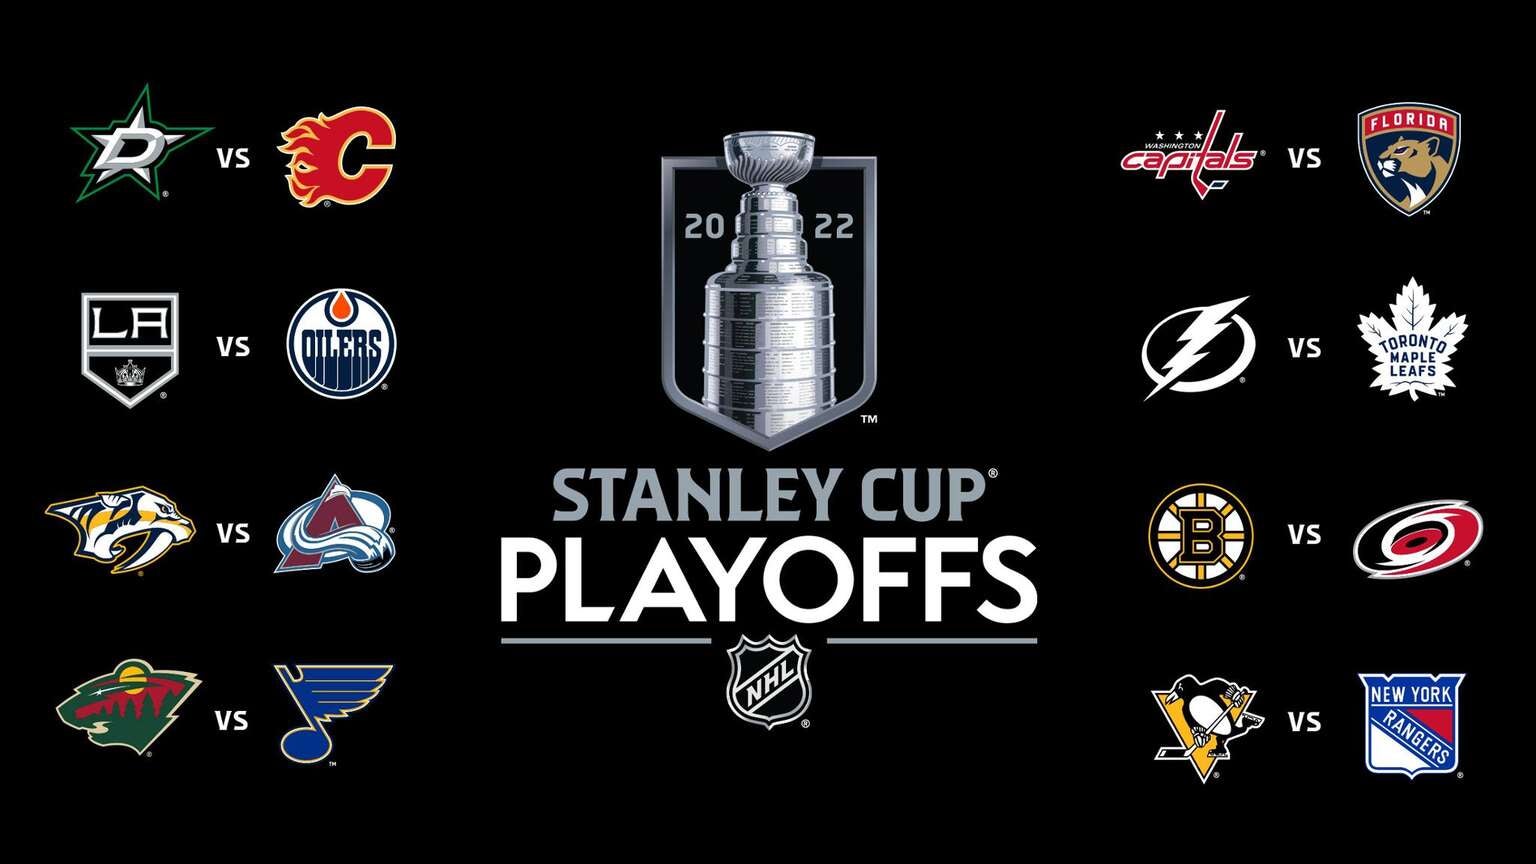 NHL Releases 2022 Stanley Cup Playoff TV Schedule The Streamable